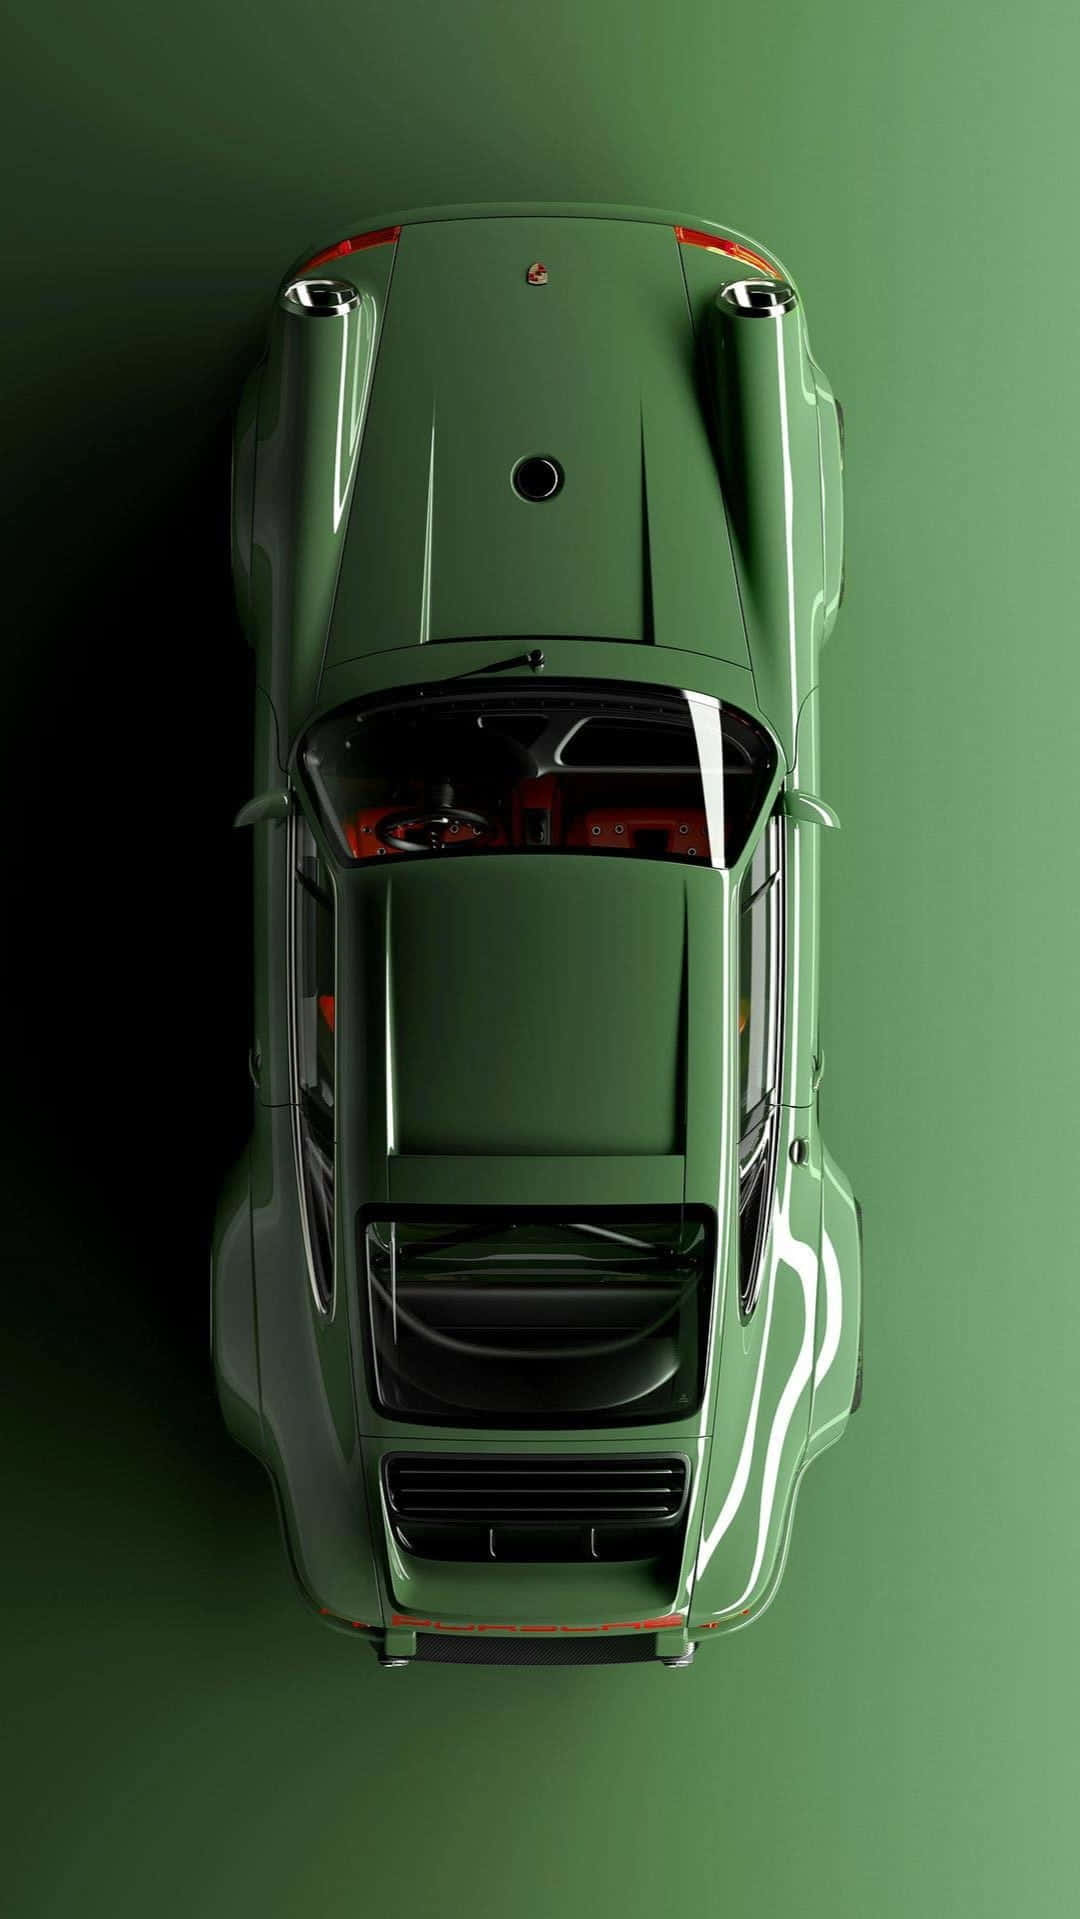 Dasessential 911 Iphone Wallpaper